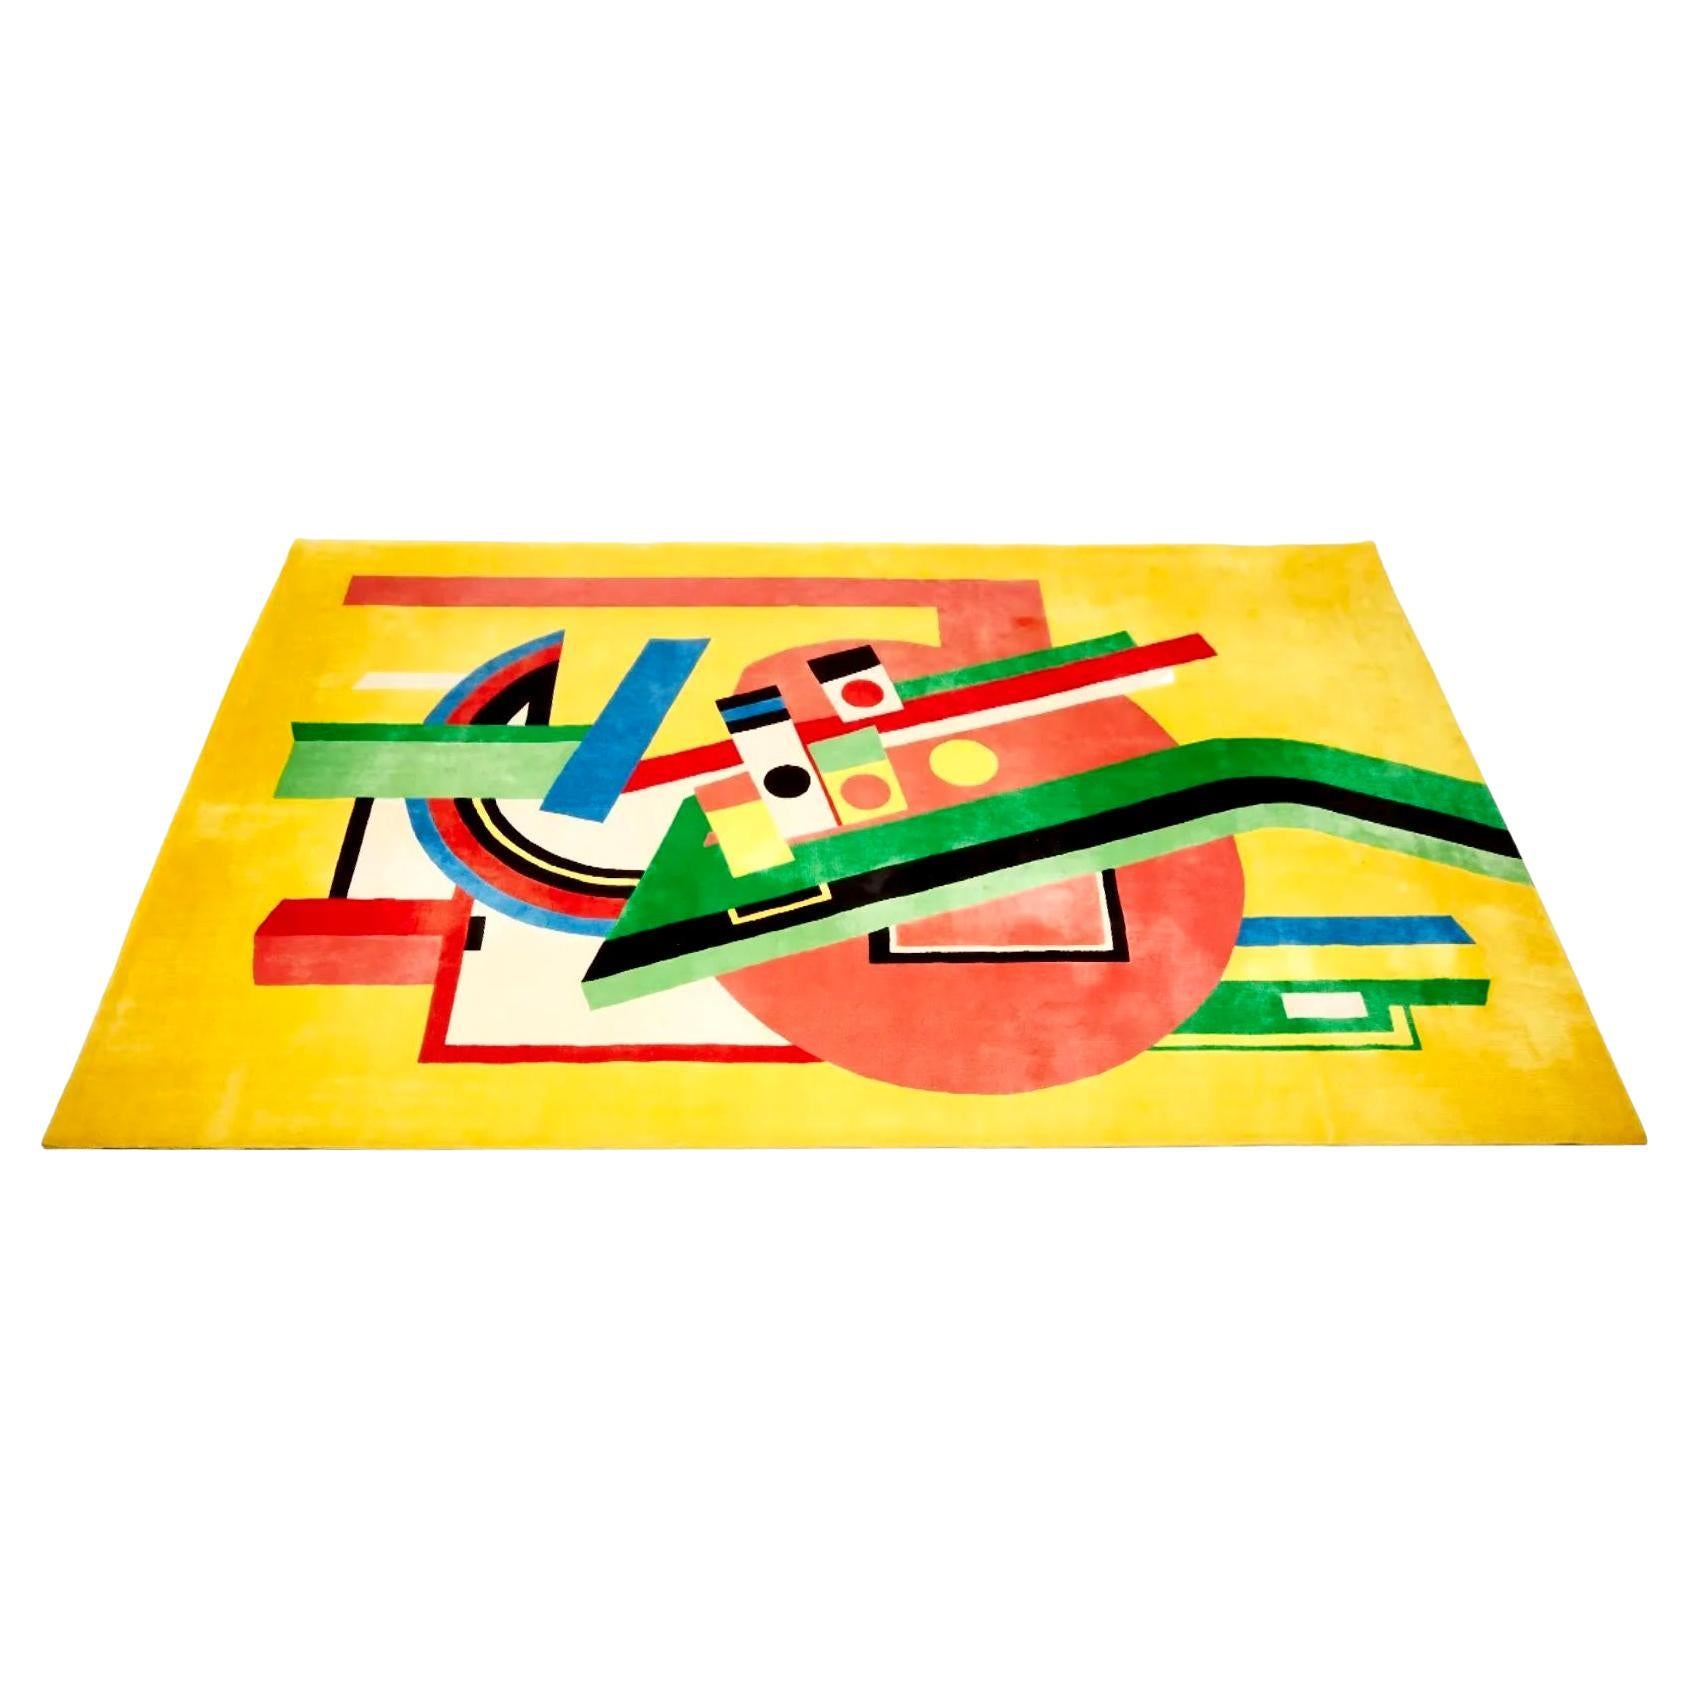 American Stanislav V'Soske Palatial Abstract Wool Area Rug, Yellow, Pink, Green, Red 1970